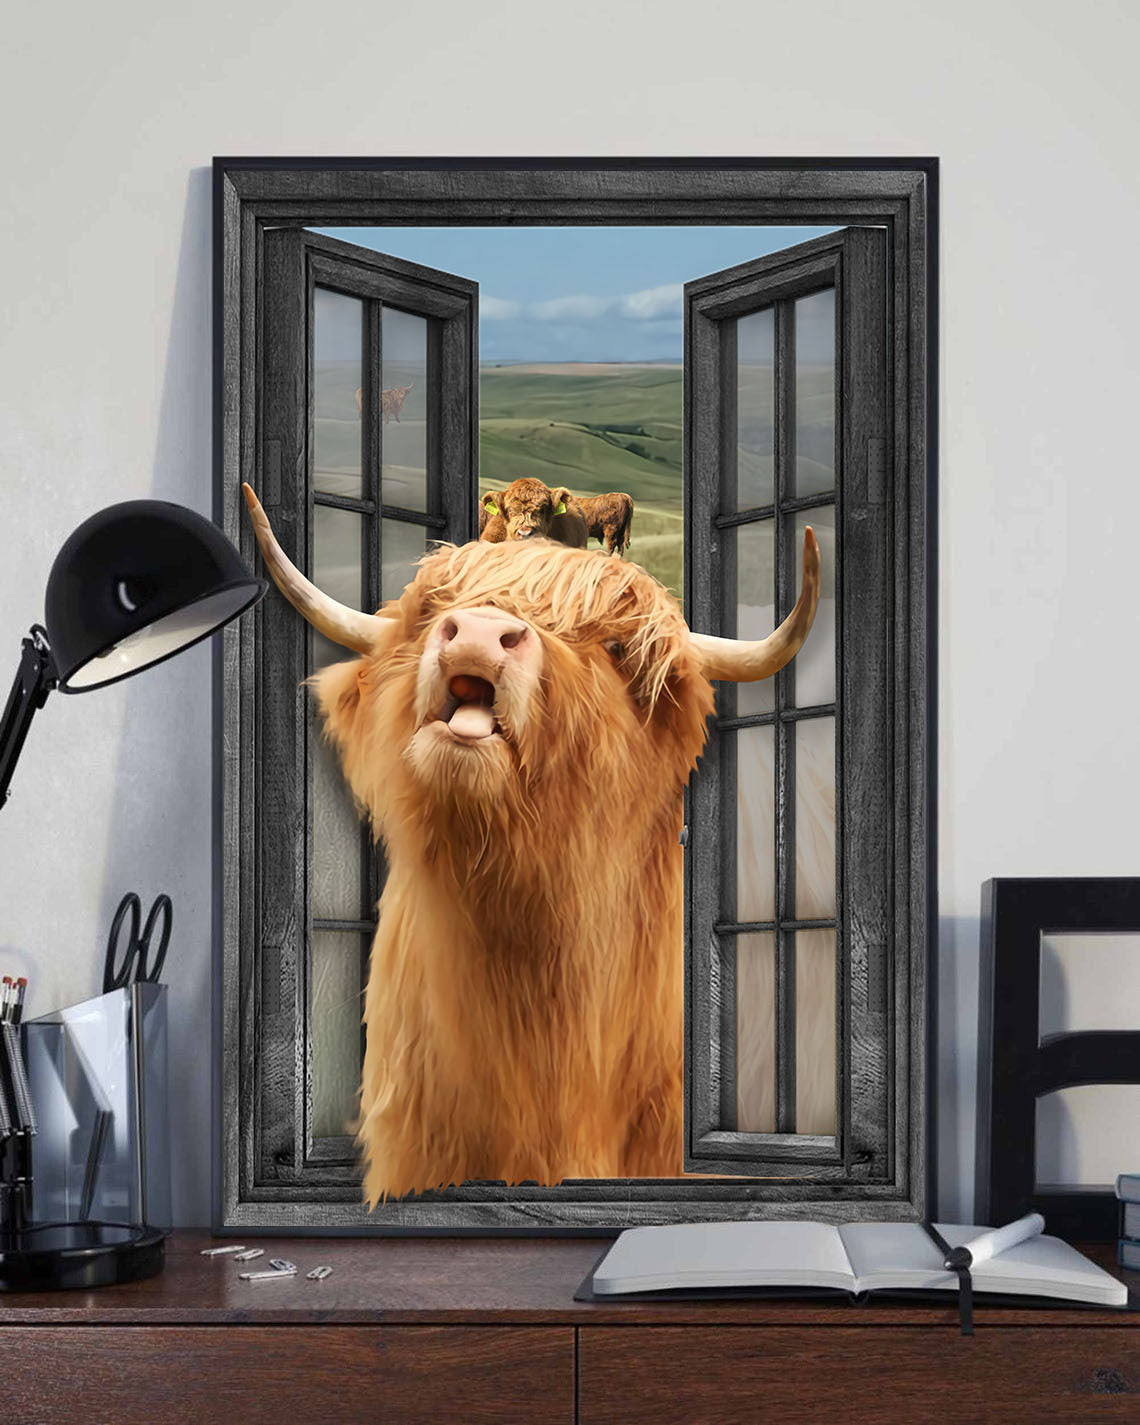 Highland Cow 3D Wall Art Painting Prints Home Decor Cattle Lover Landscape Seen Through Window Scene Wall Mural, 3D Window Wall Decal, Window Wall Mural, Window Wall Sticker, Window Sticker Gift Idea 18x30IN